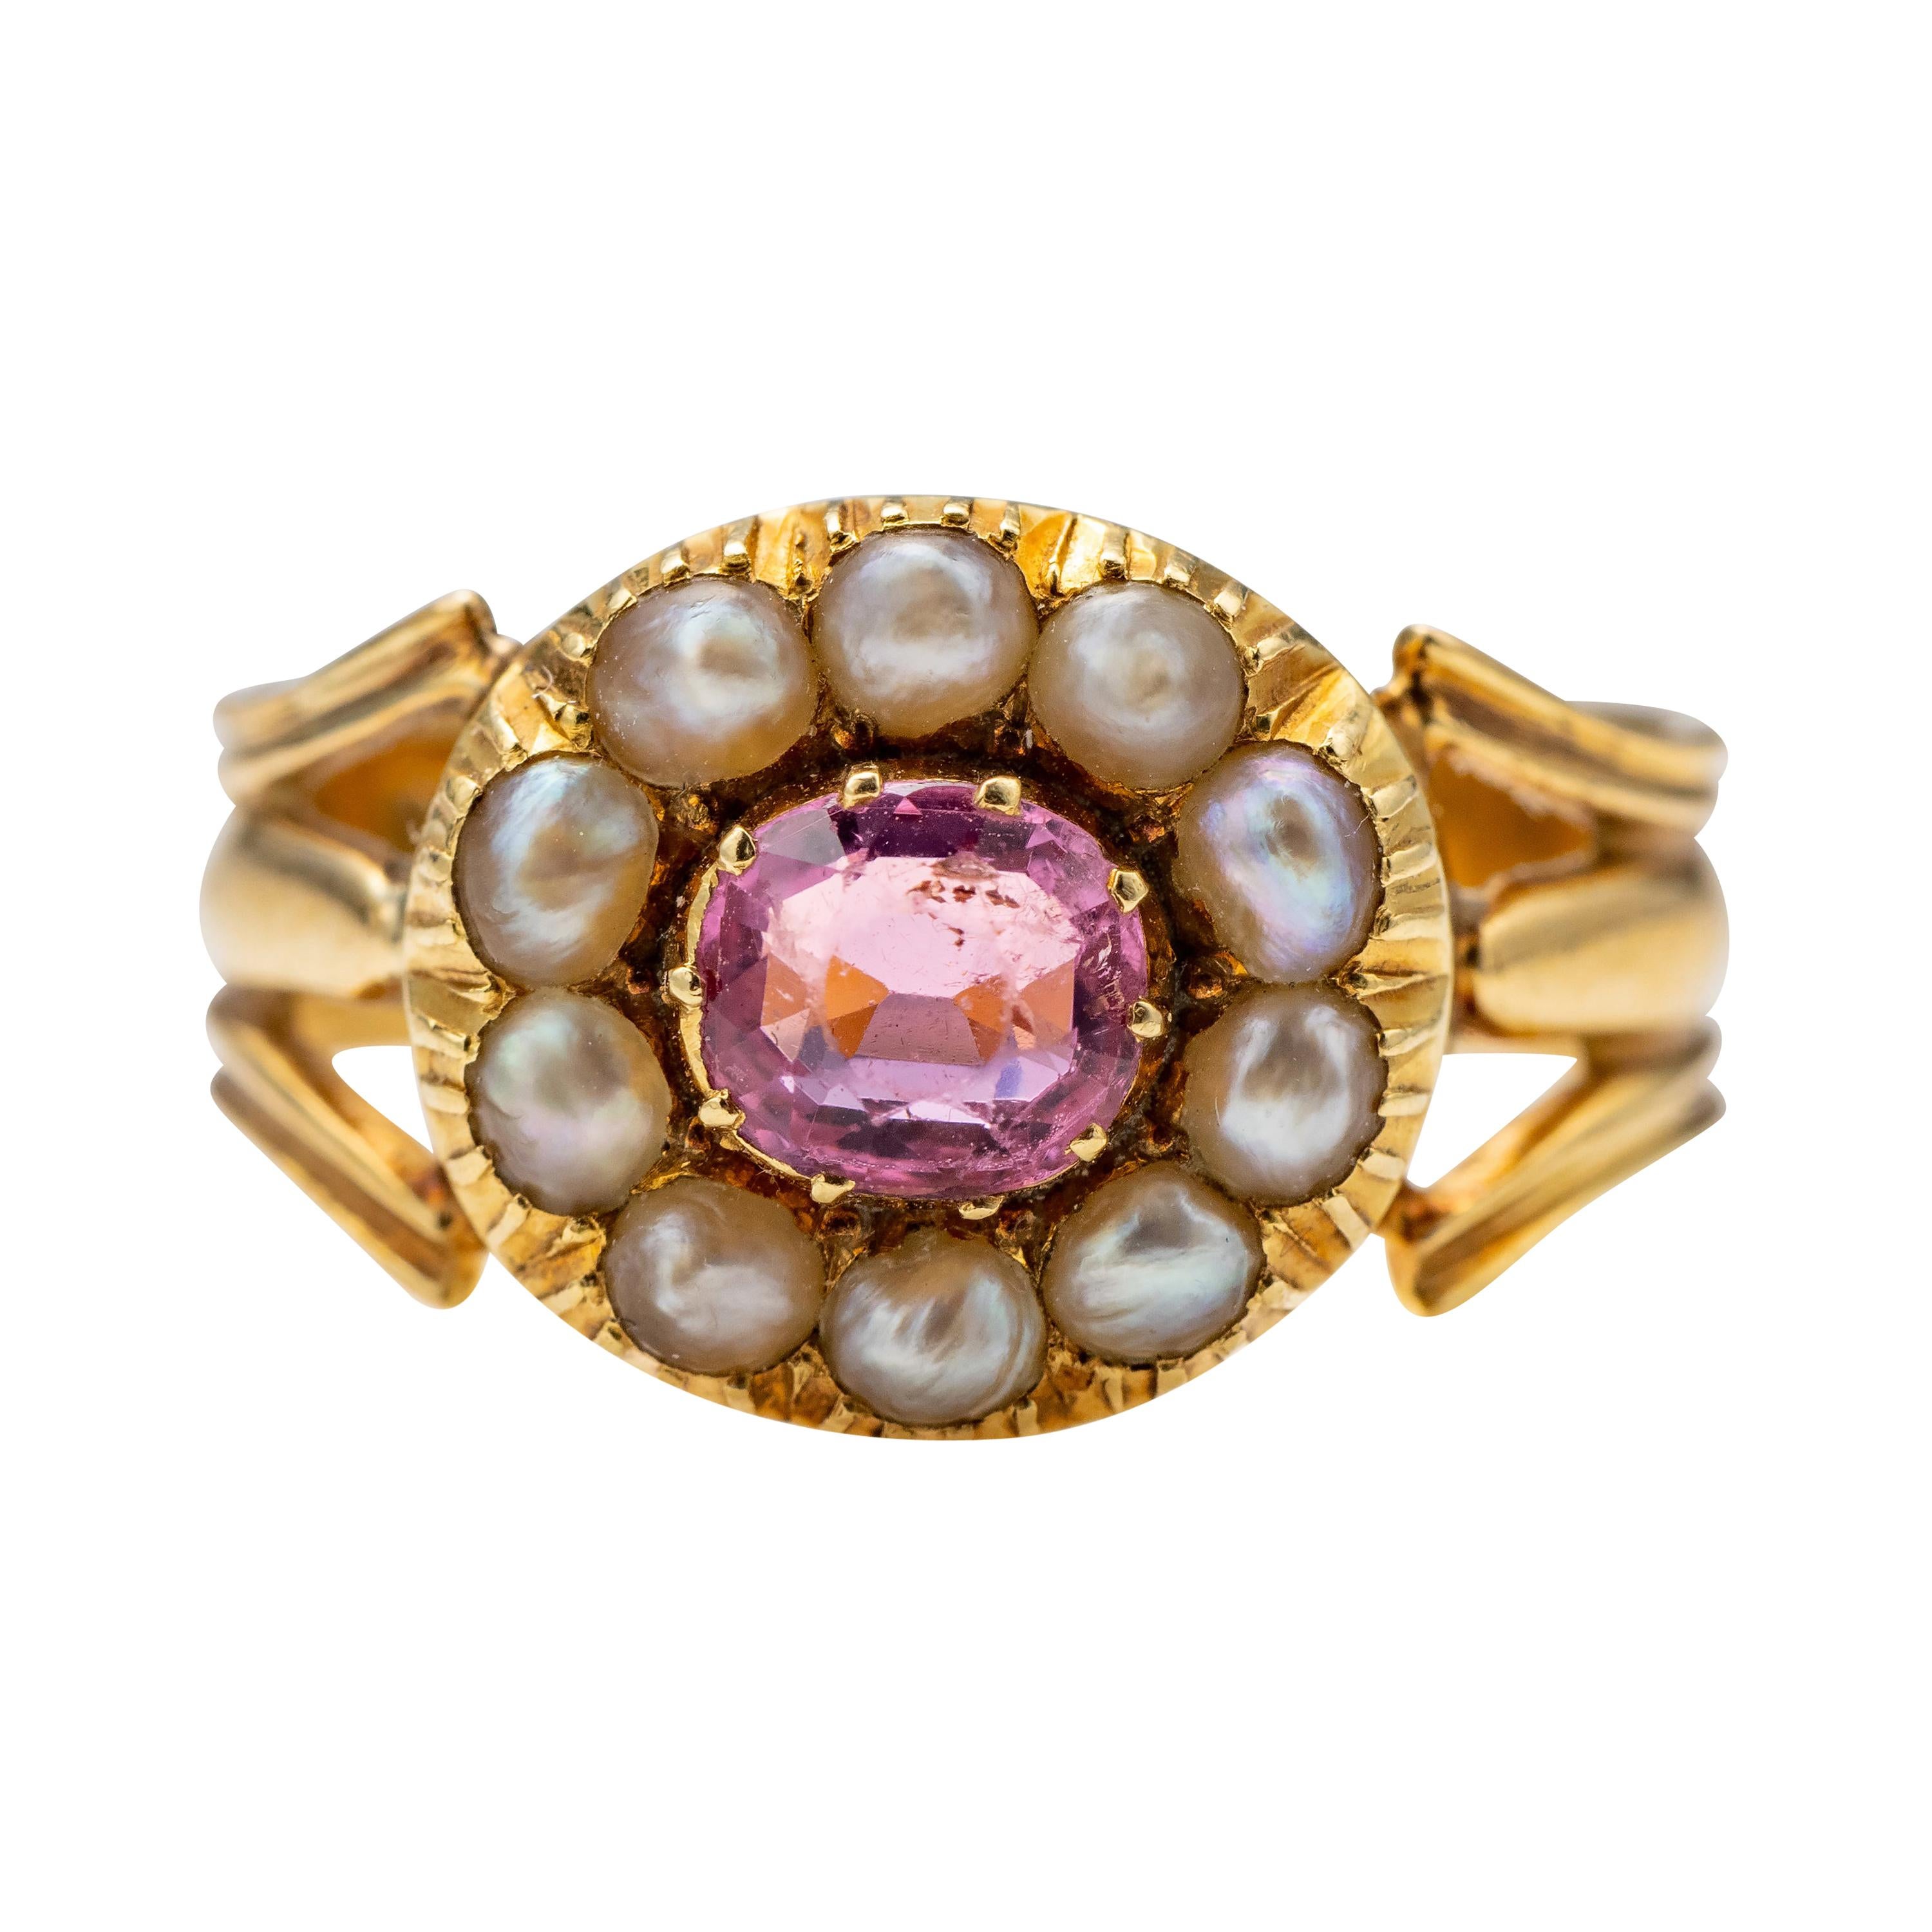 Antique Tourmaline & Natural Pearl Ring